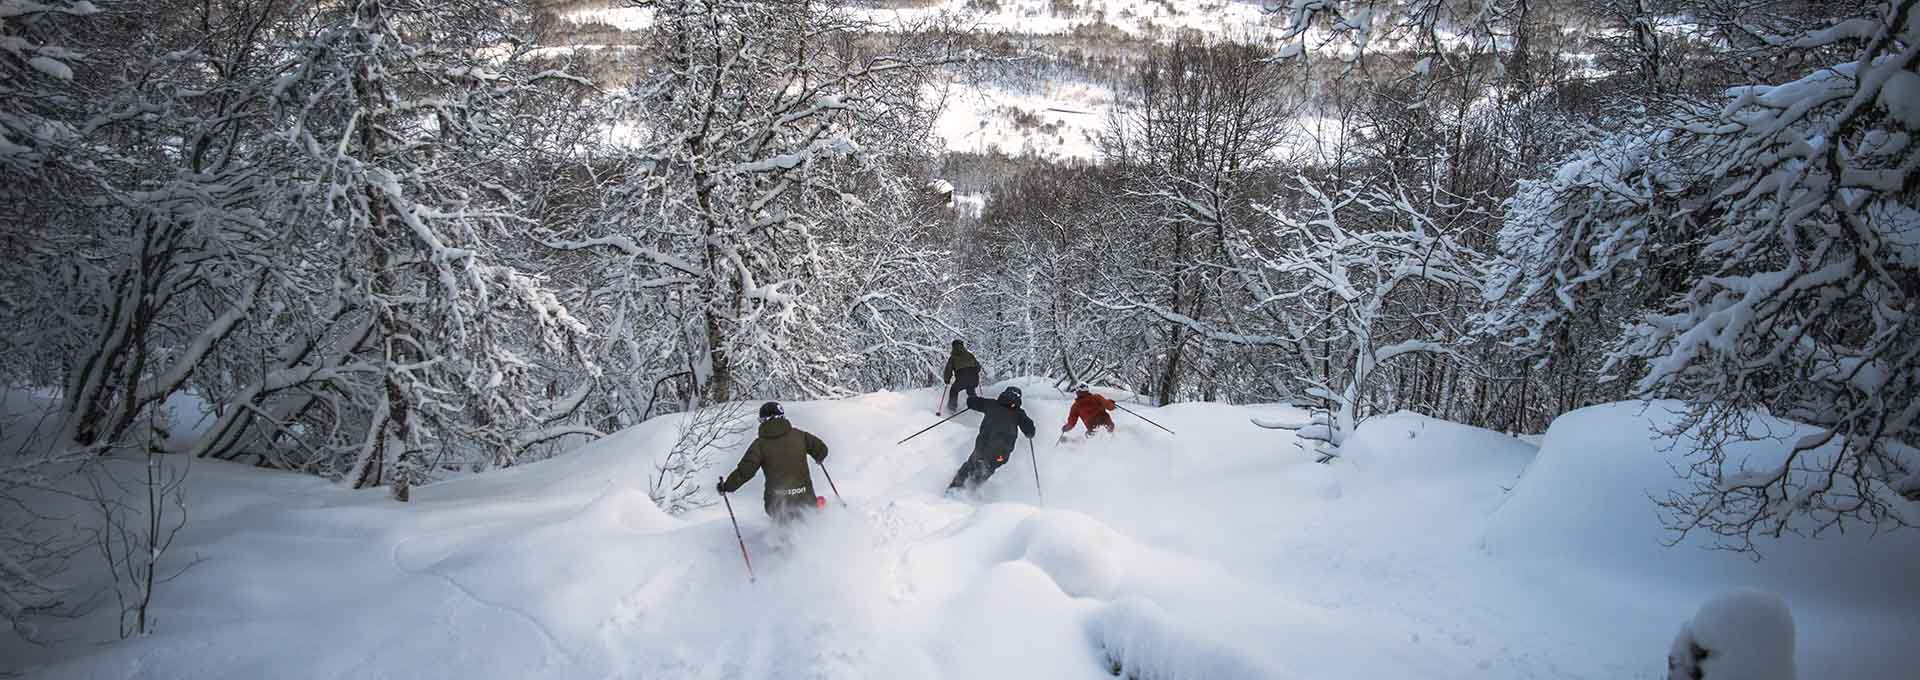 off-piste skiing in birch forest